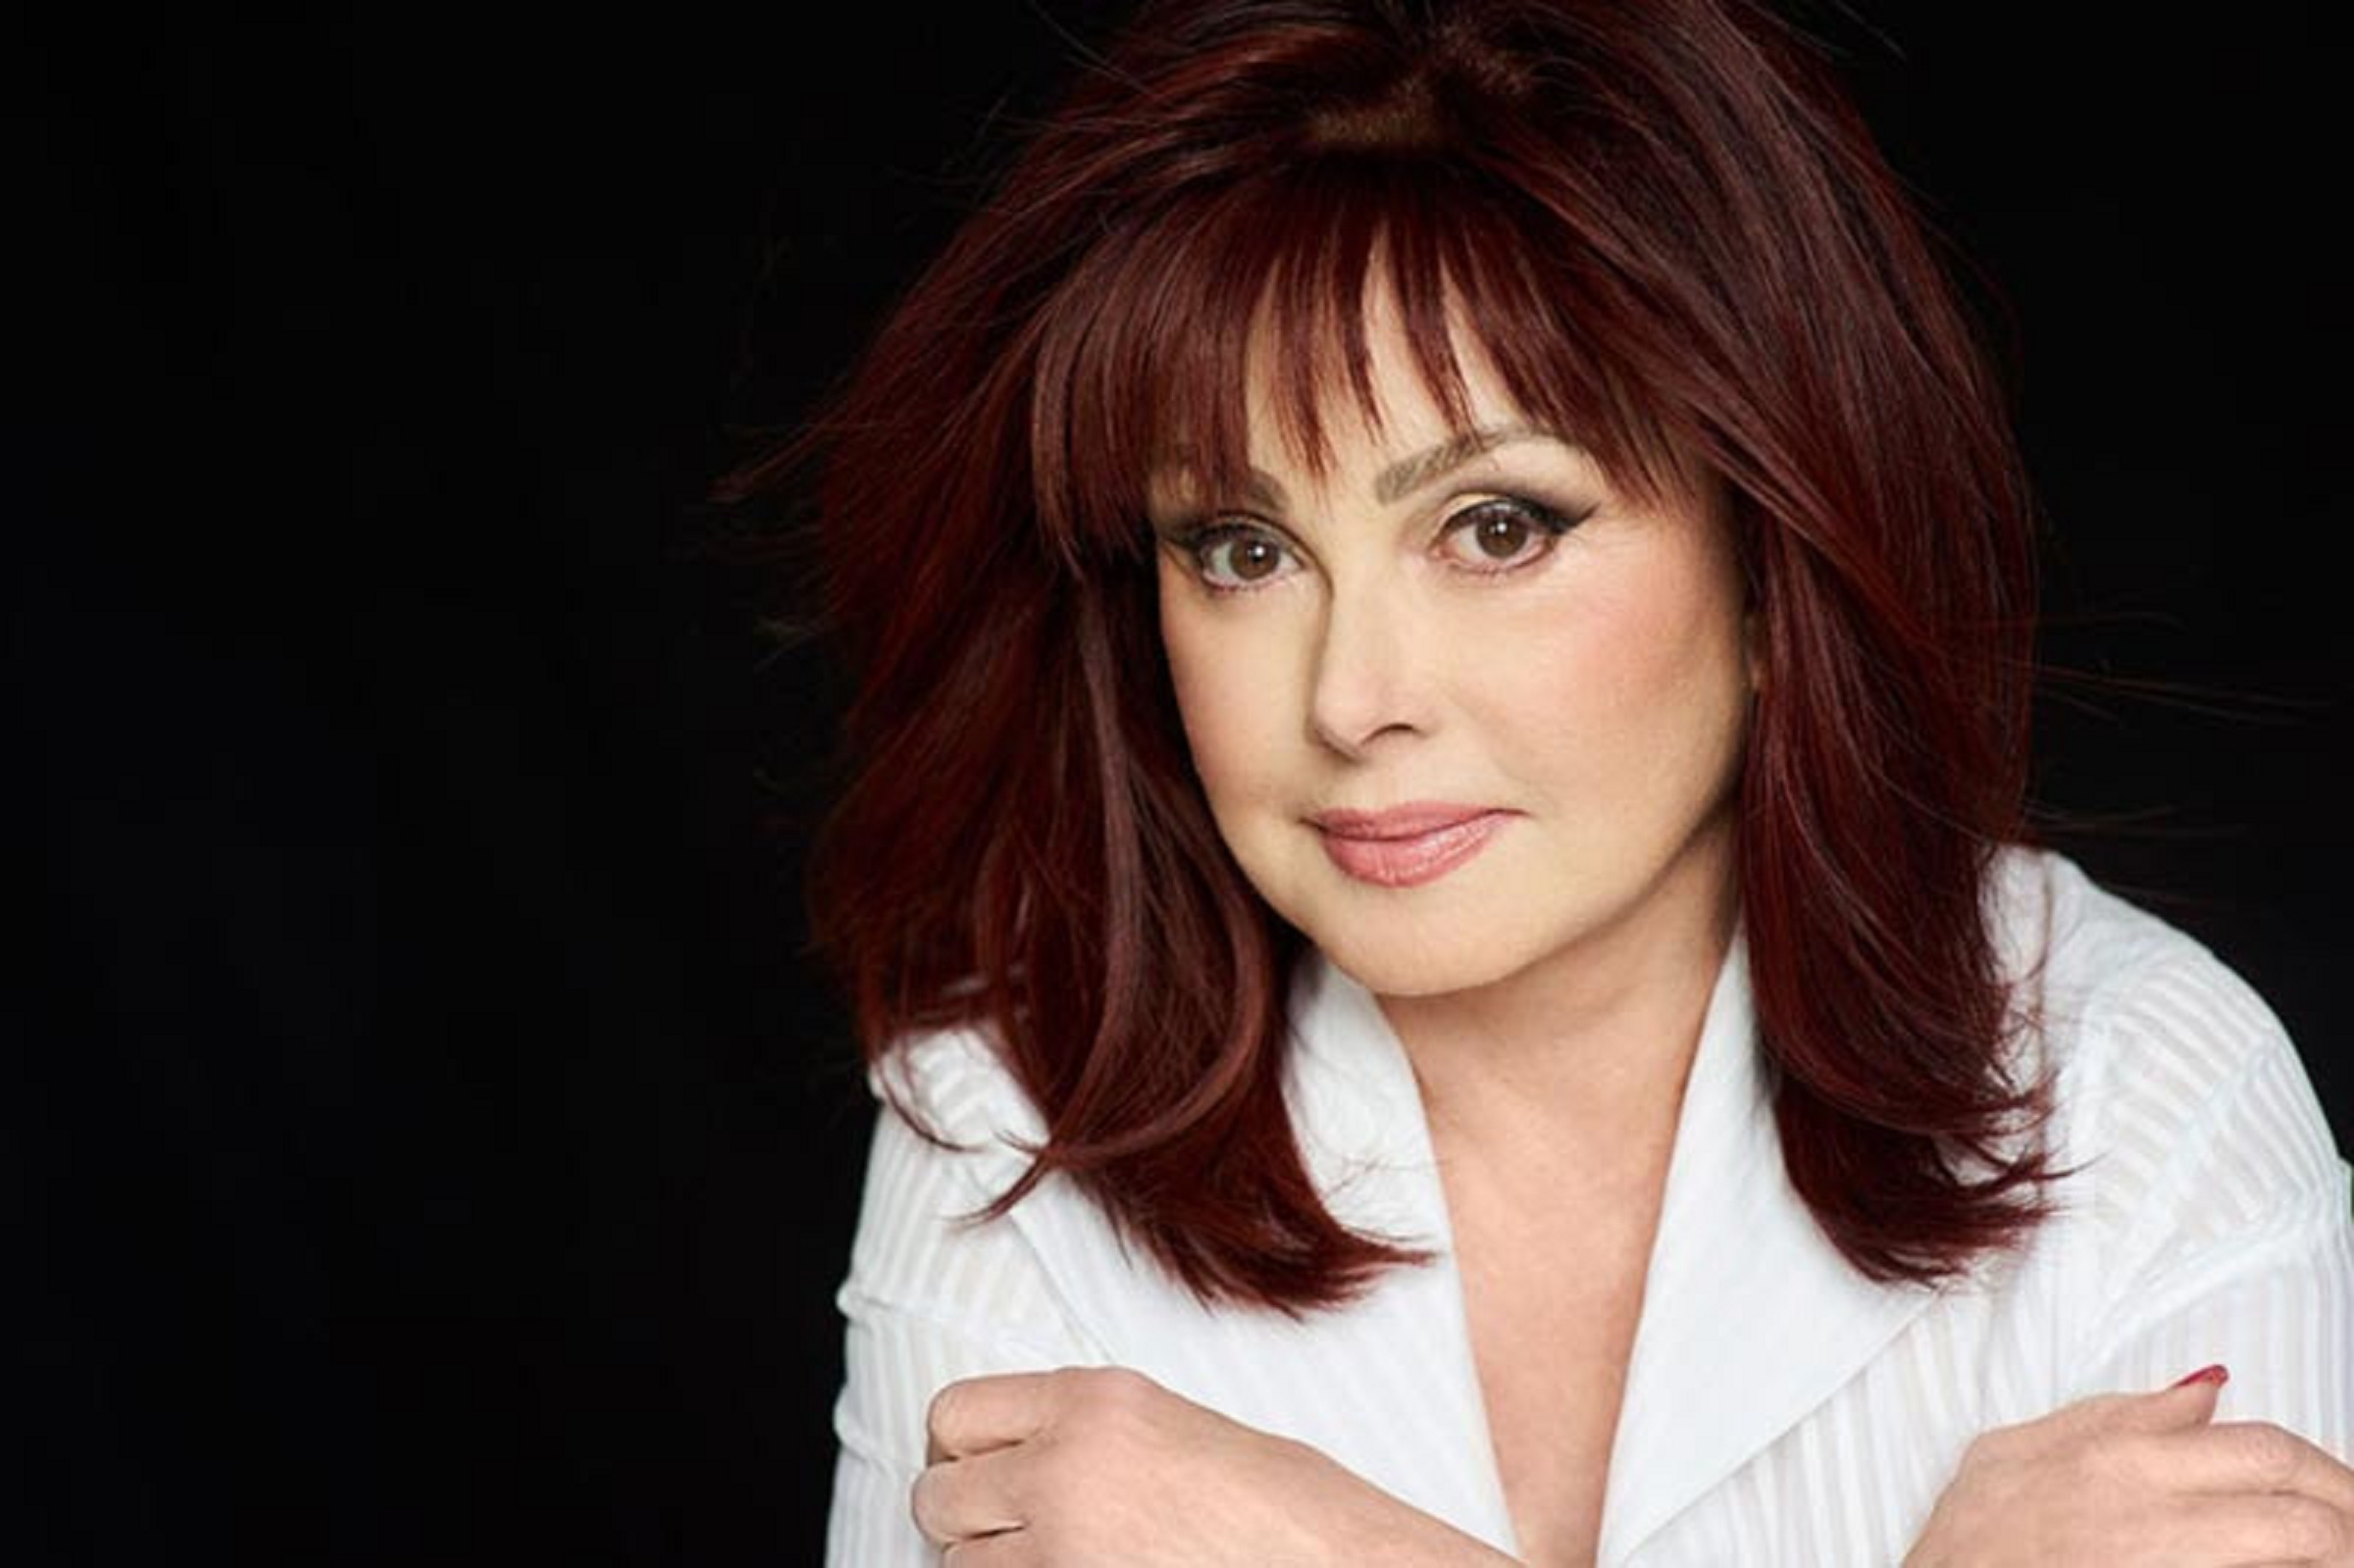 COUNTRY MUSIC COMMUNITY MOURNS THE LOSS OF NAOMI JUDD